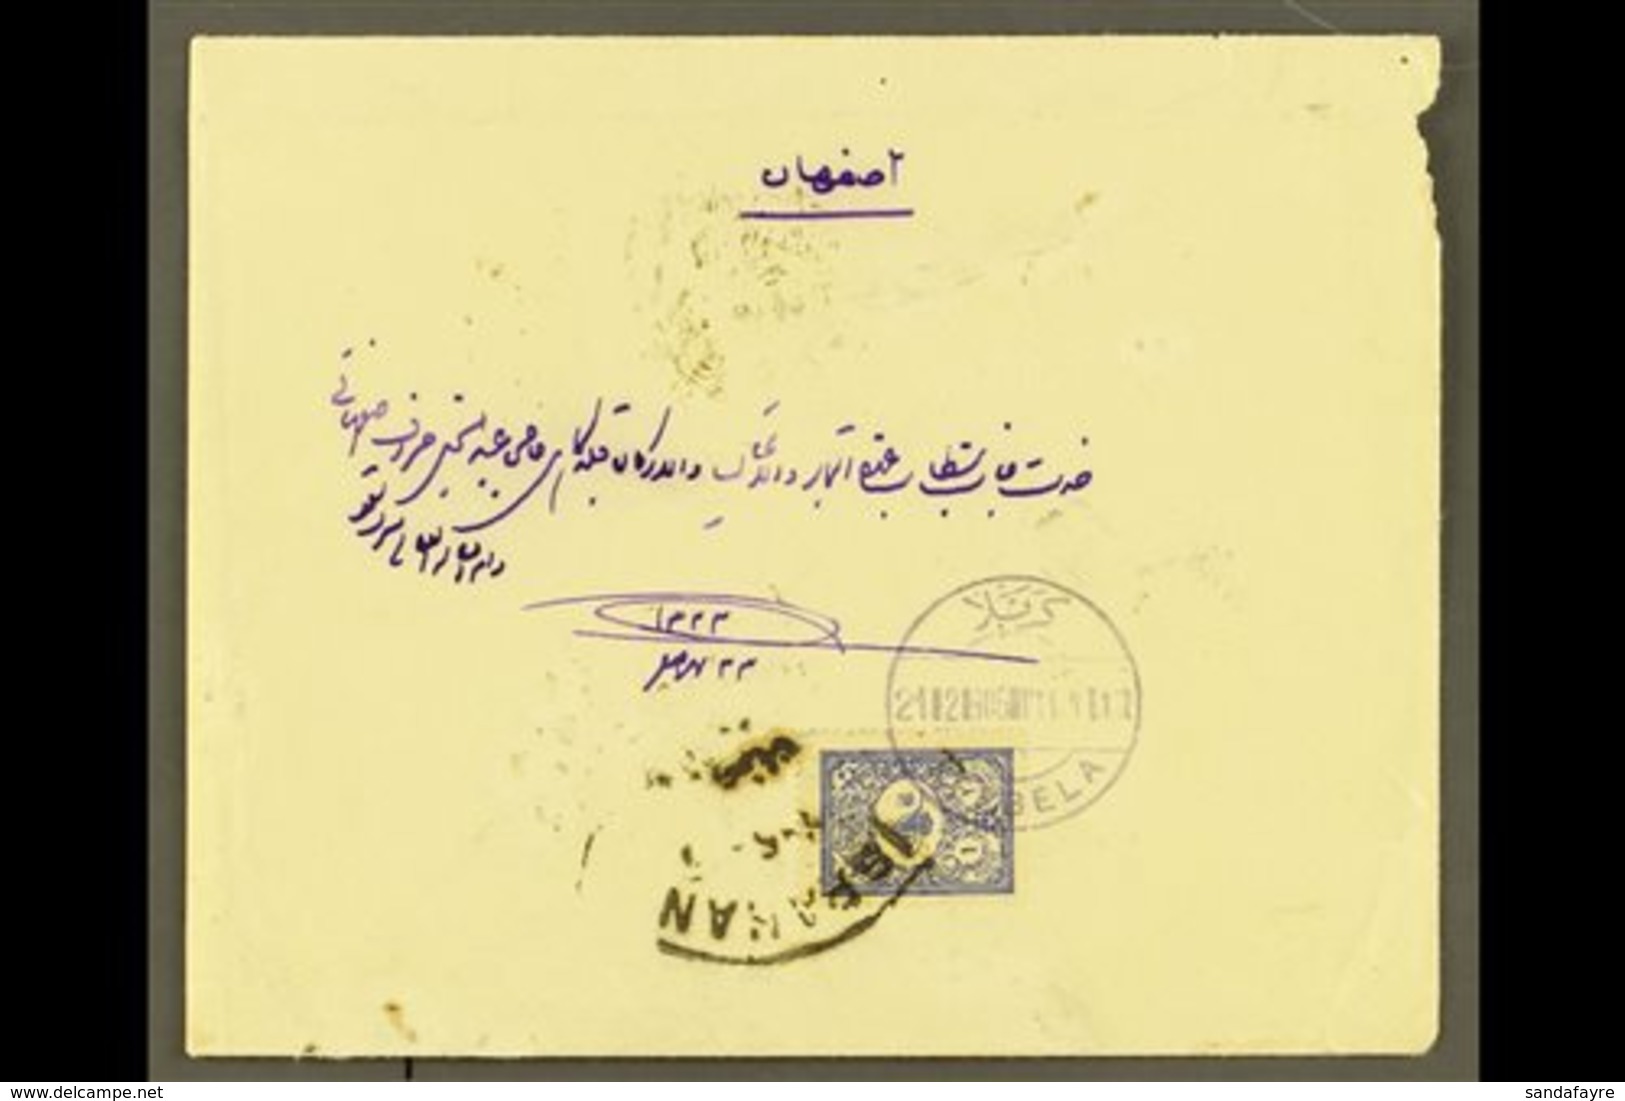 TURKEY USED IN 1905 (21 Feb) Cover Addressed In Arabic To Persia, Bearing  Turkey 1901 1pi Foreign Mail Tied By Fine Bil - Iraq